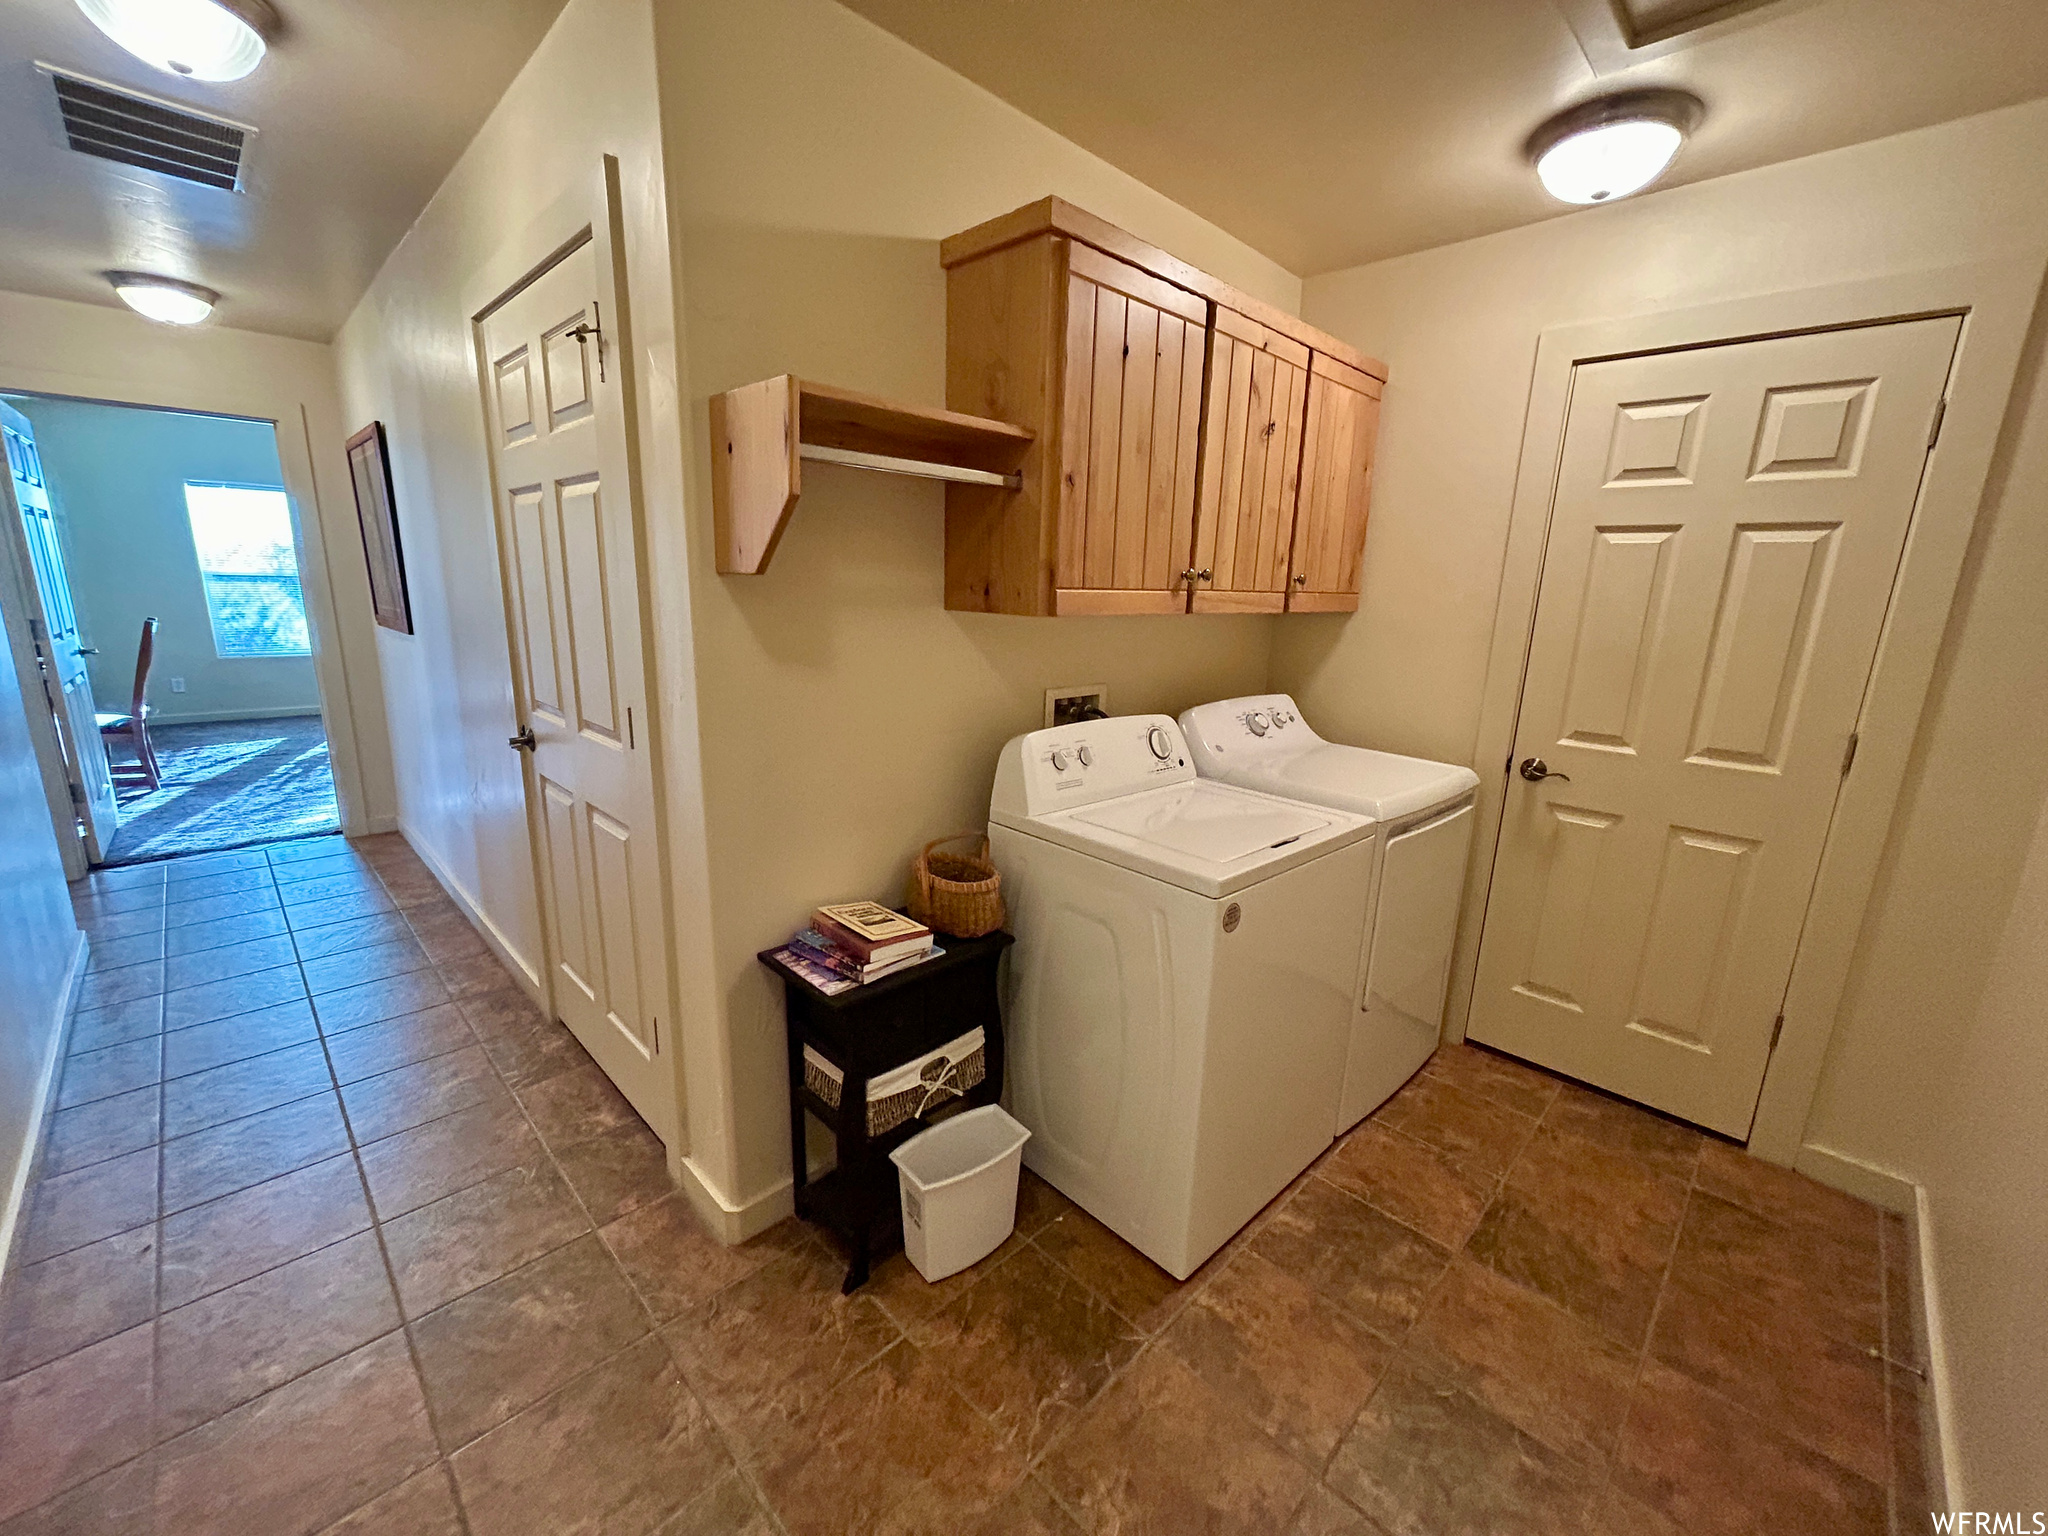 Washroom featuring washer hookup, cabinets, separate washer and dryer, and dark tile floors